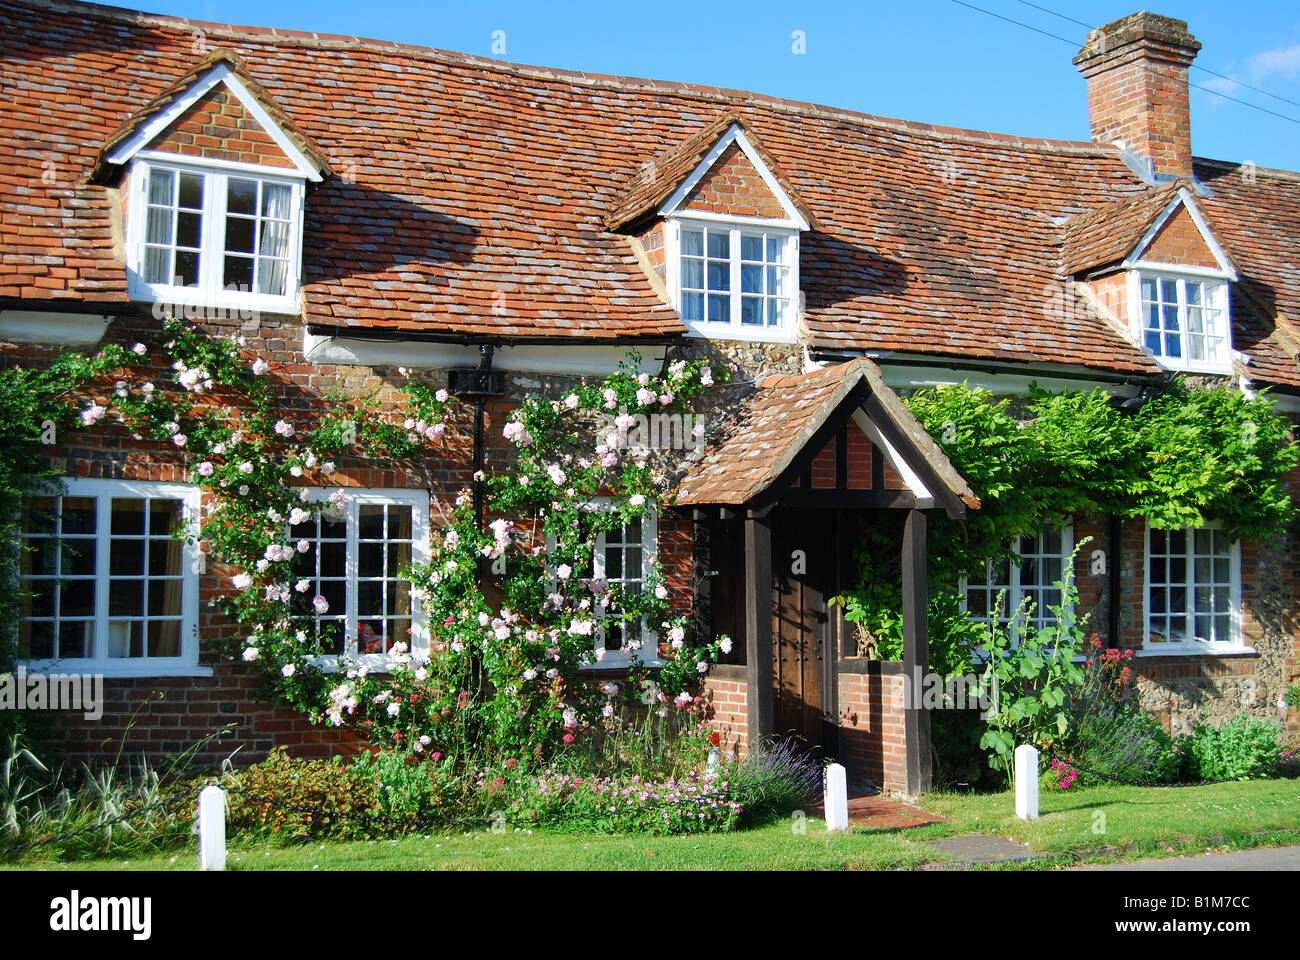 Picturesque cottage in village centre, Turville, Buckinghamshire, England, United Kingdom Stock Photo